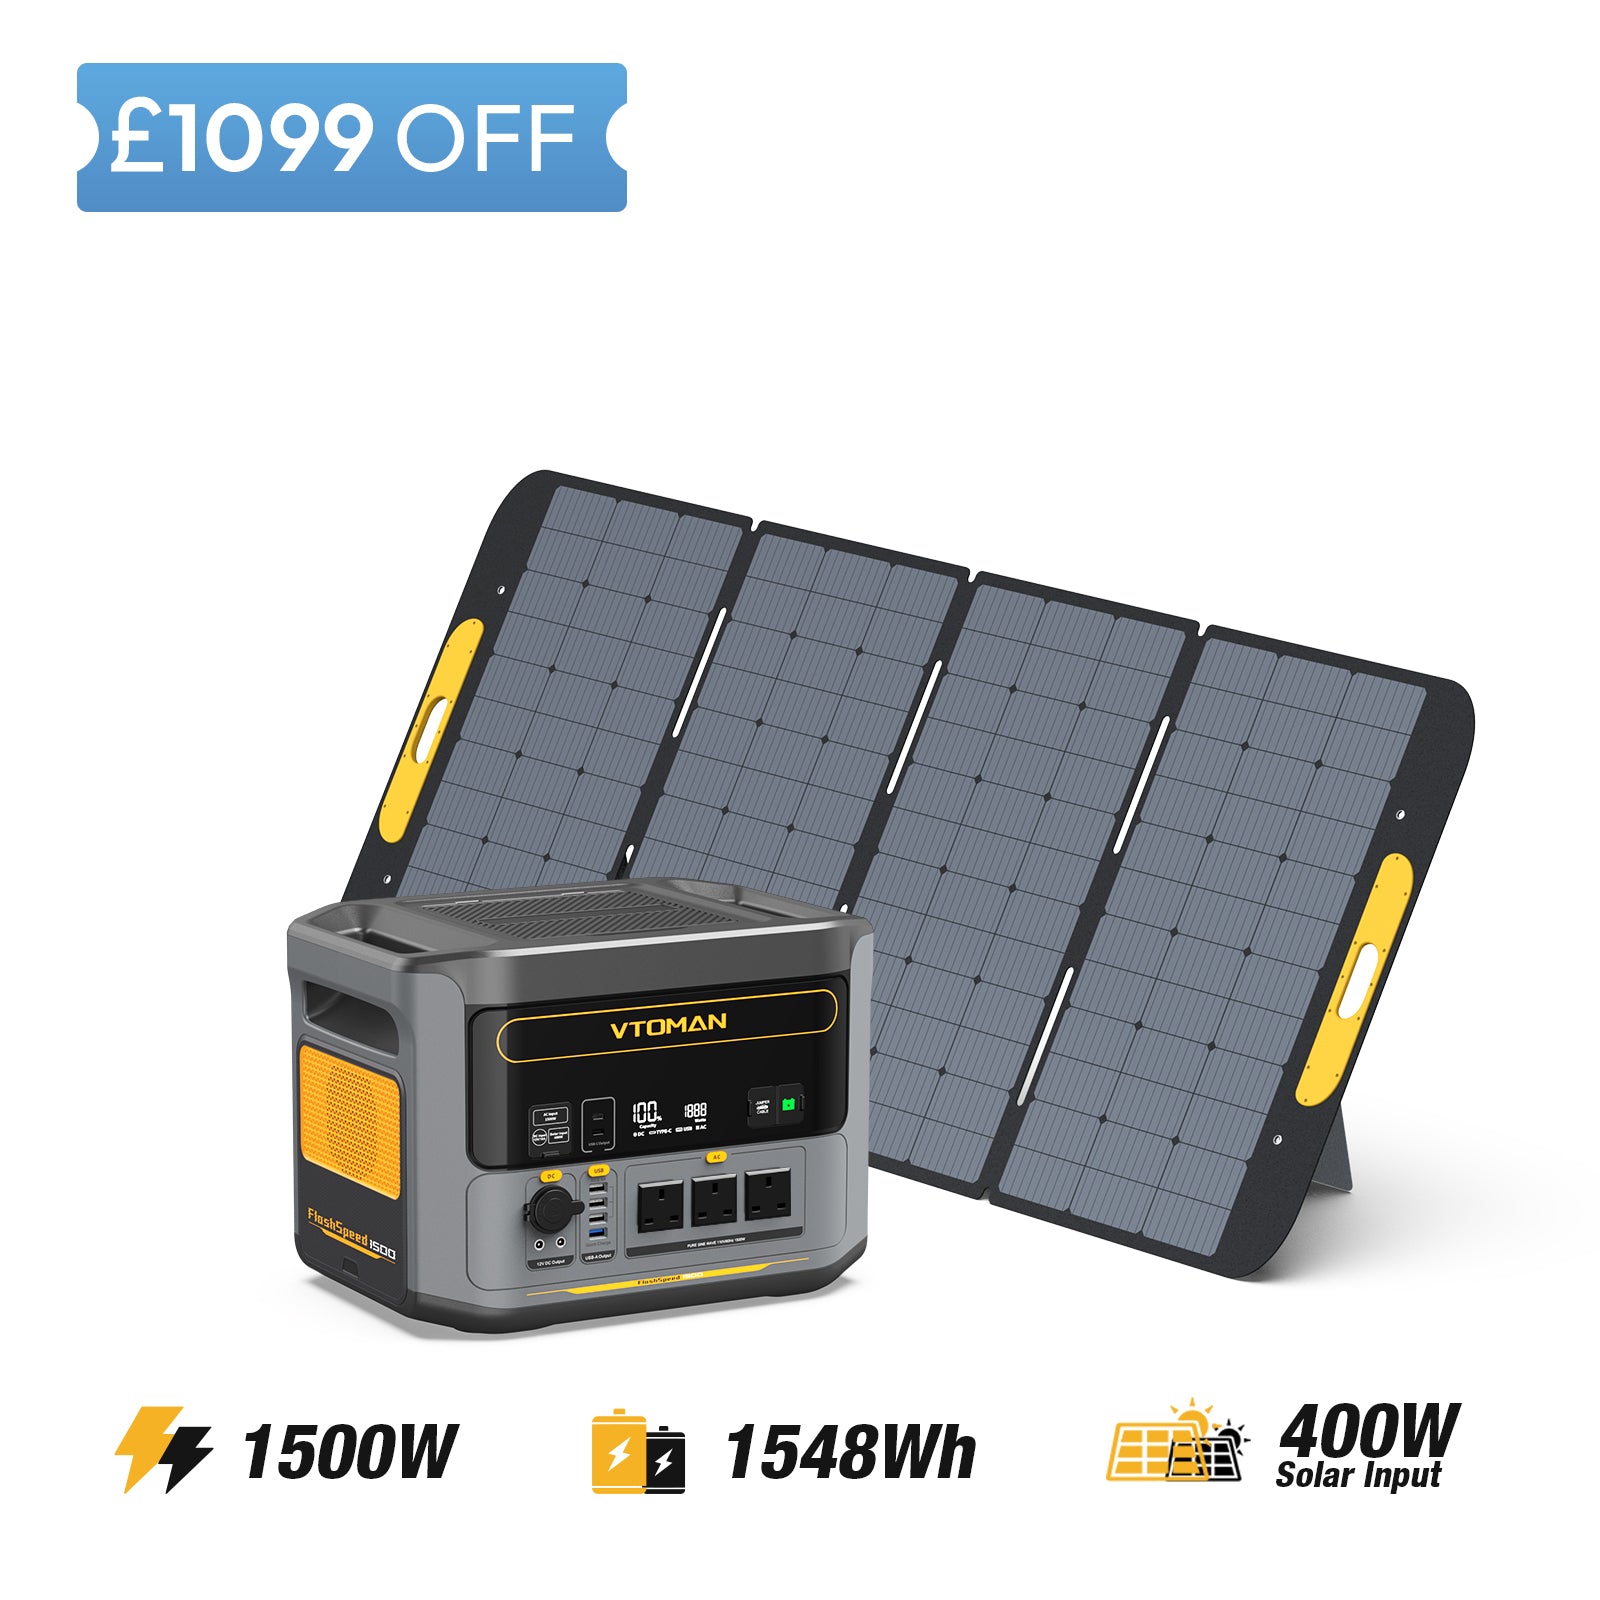 FlashSpeed 1500 and 400W solar panel save £1099 in summer sale